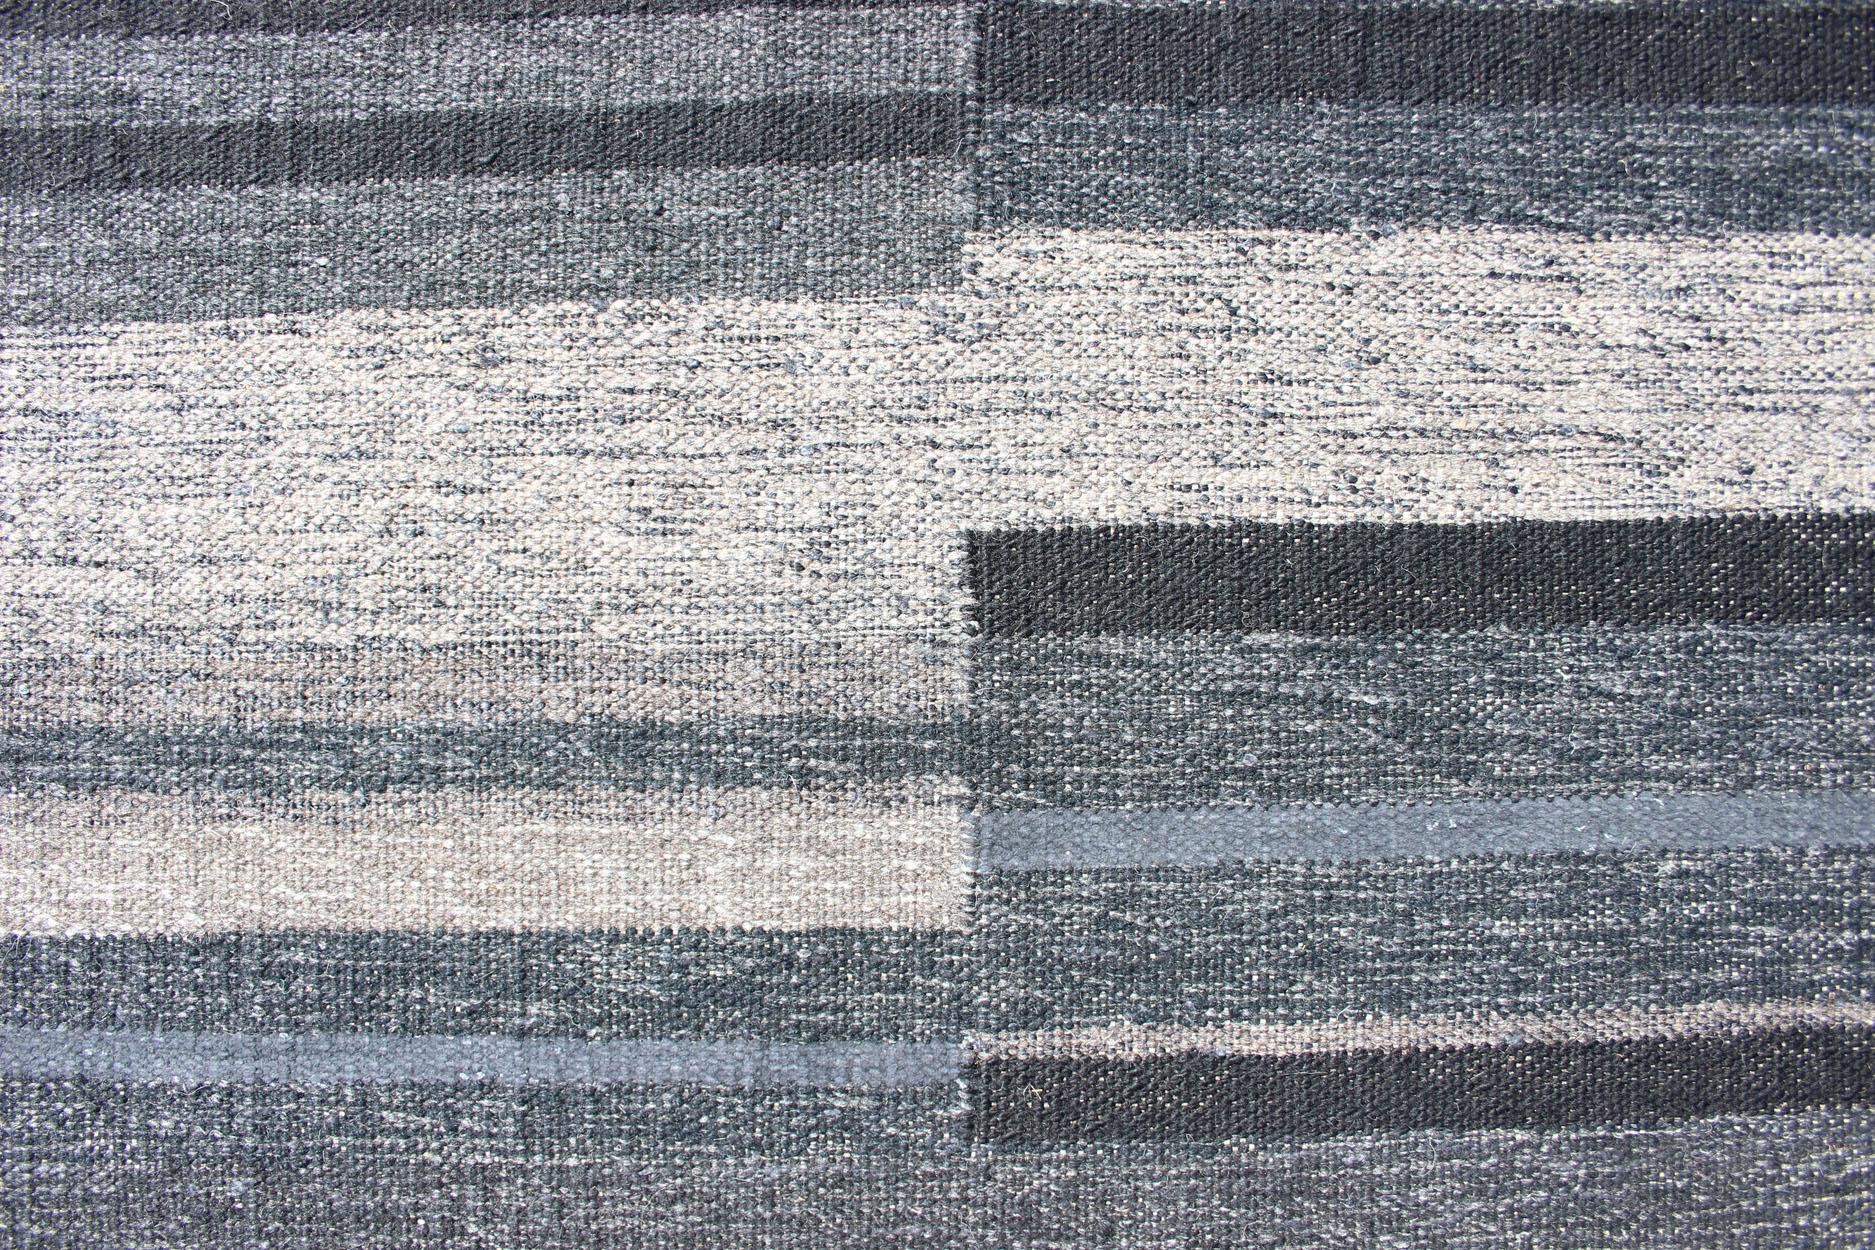 Modern Scandinavian Flat-Weave Rug with Striped Panel Design in Gray, Steel Blue For Sale 2